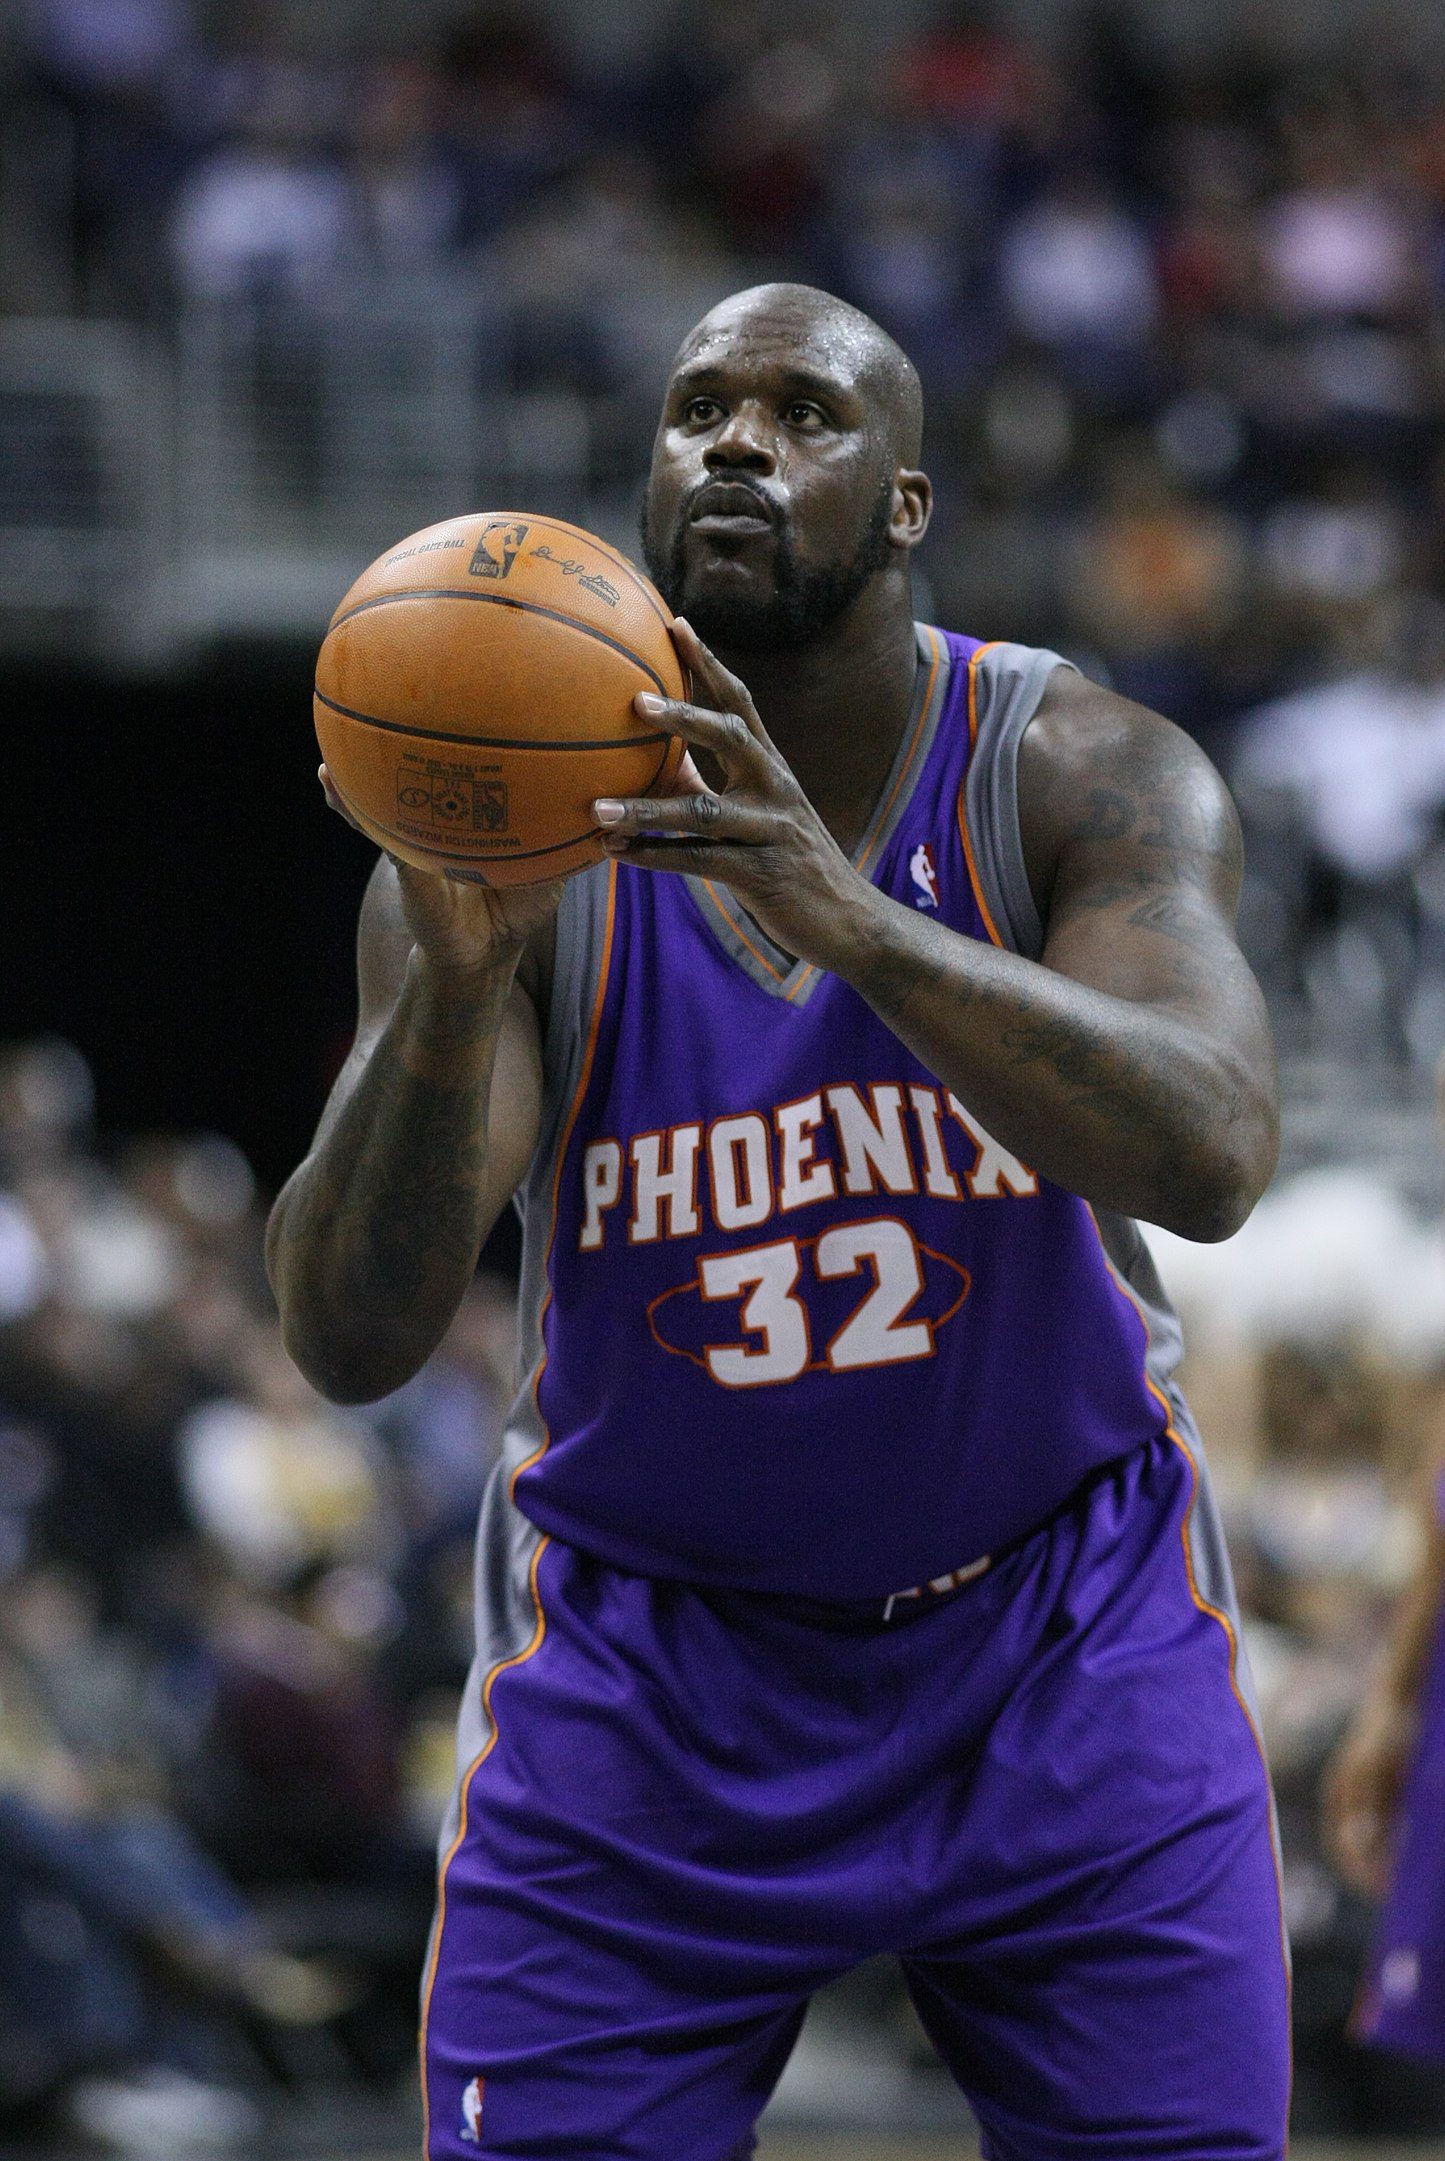 Shaquille O'Neal Reveals His List Of Top 10 Players Of All Time, Fadeaway  World